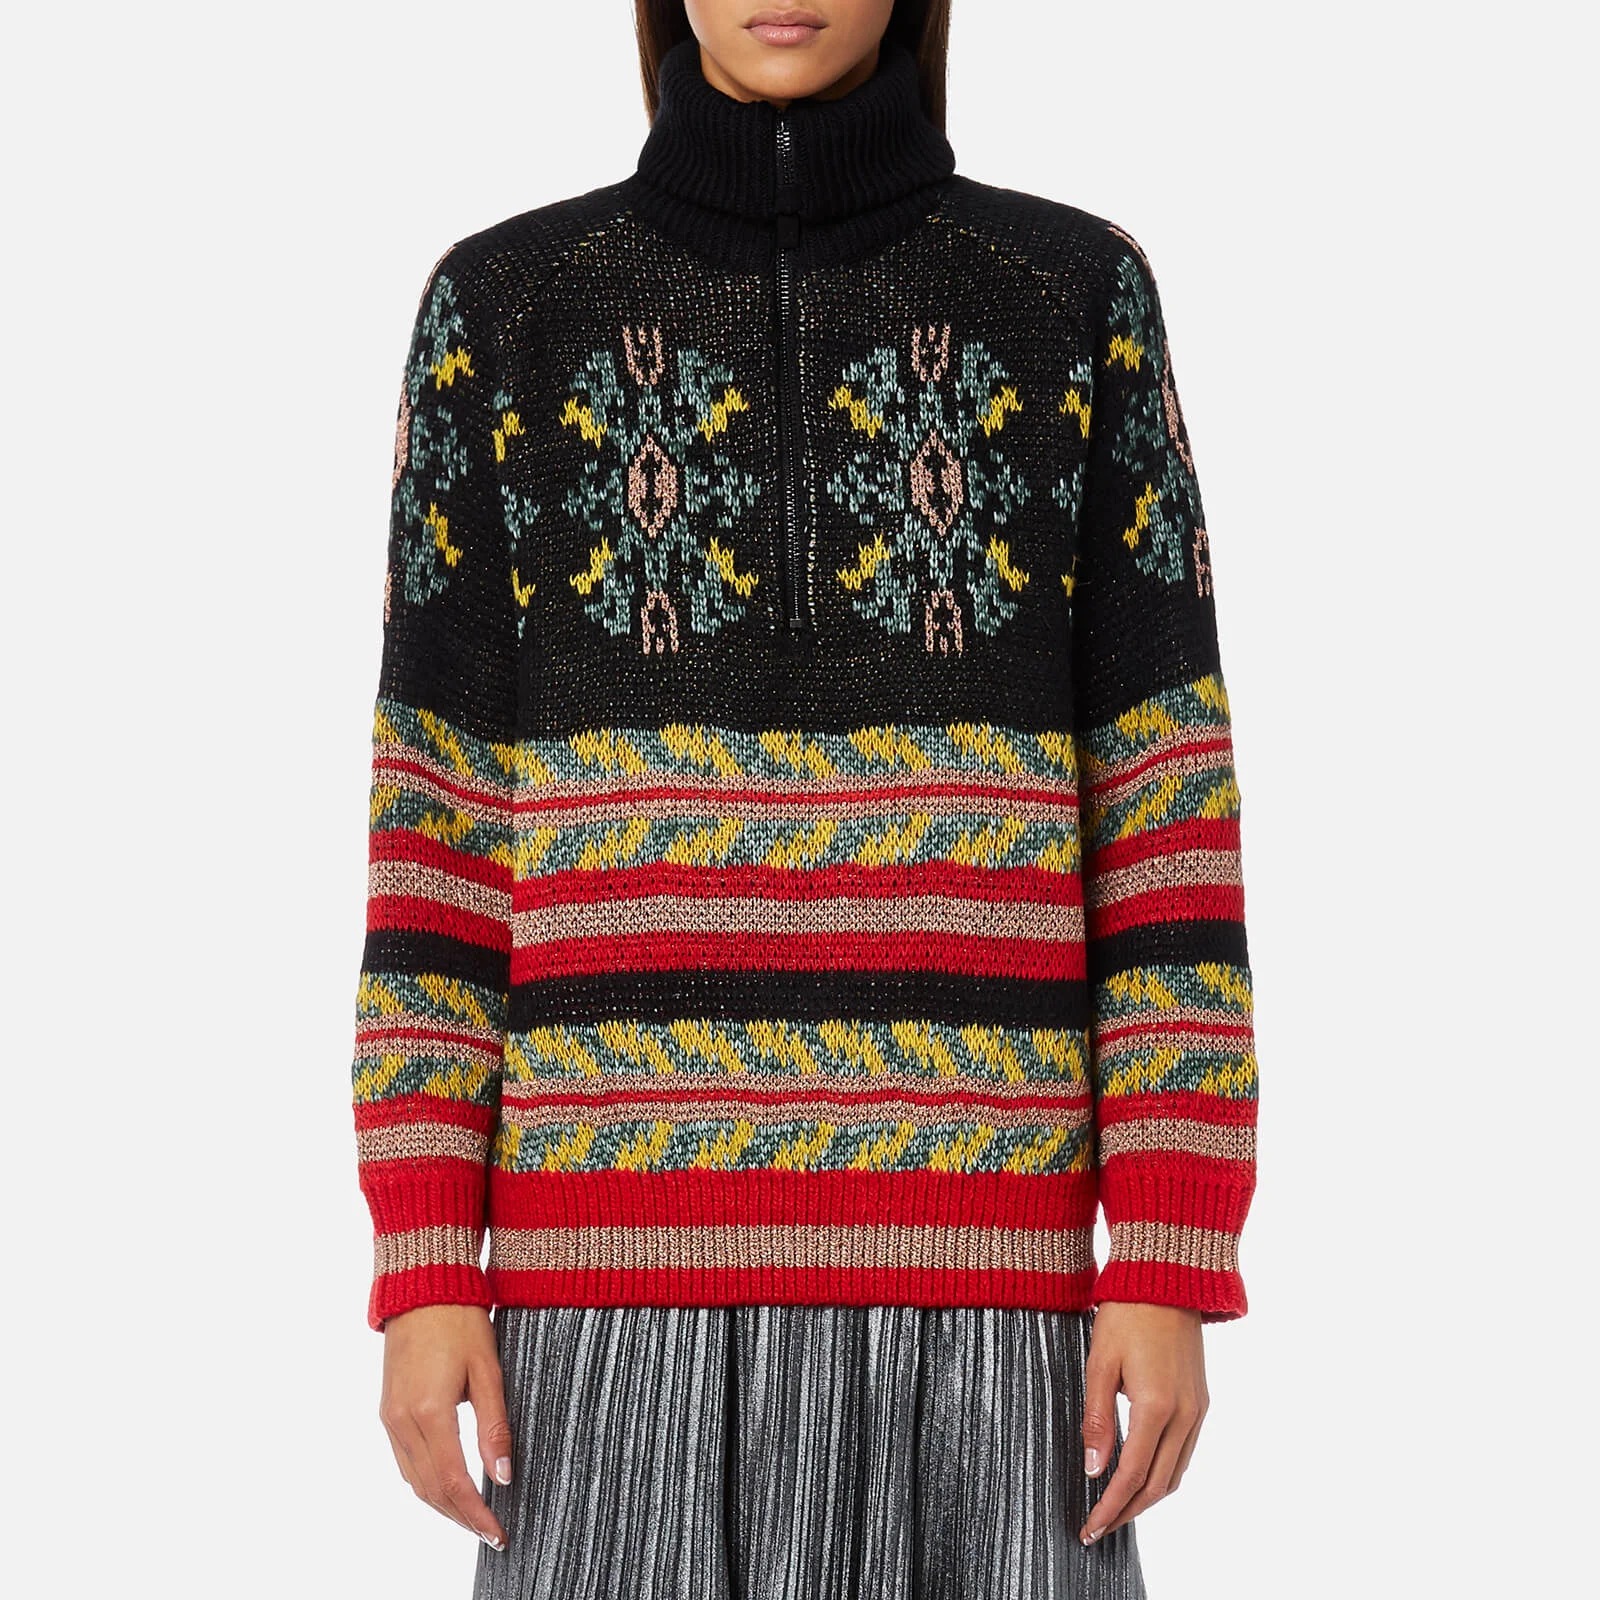 Maison Scotch Women's Special Jacquard Knitted Jumper - Combo B Image 1